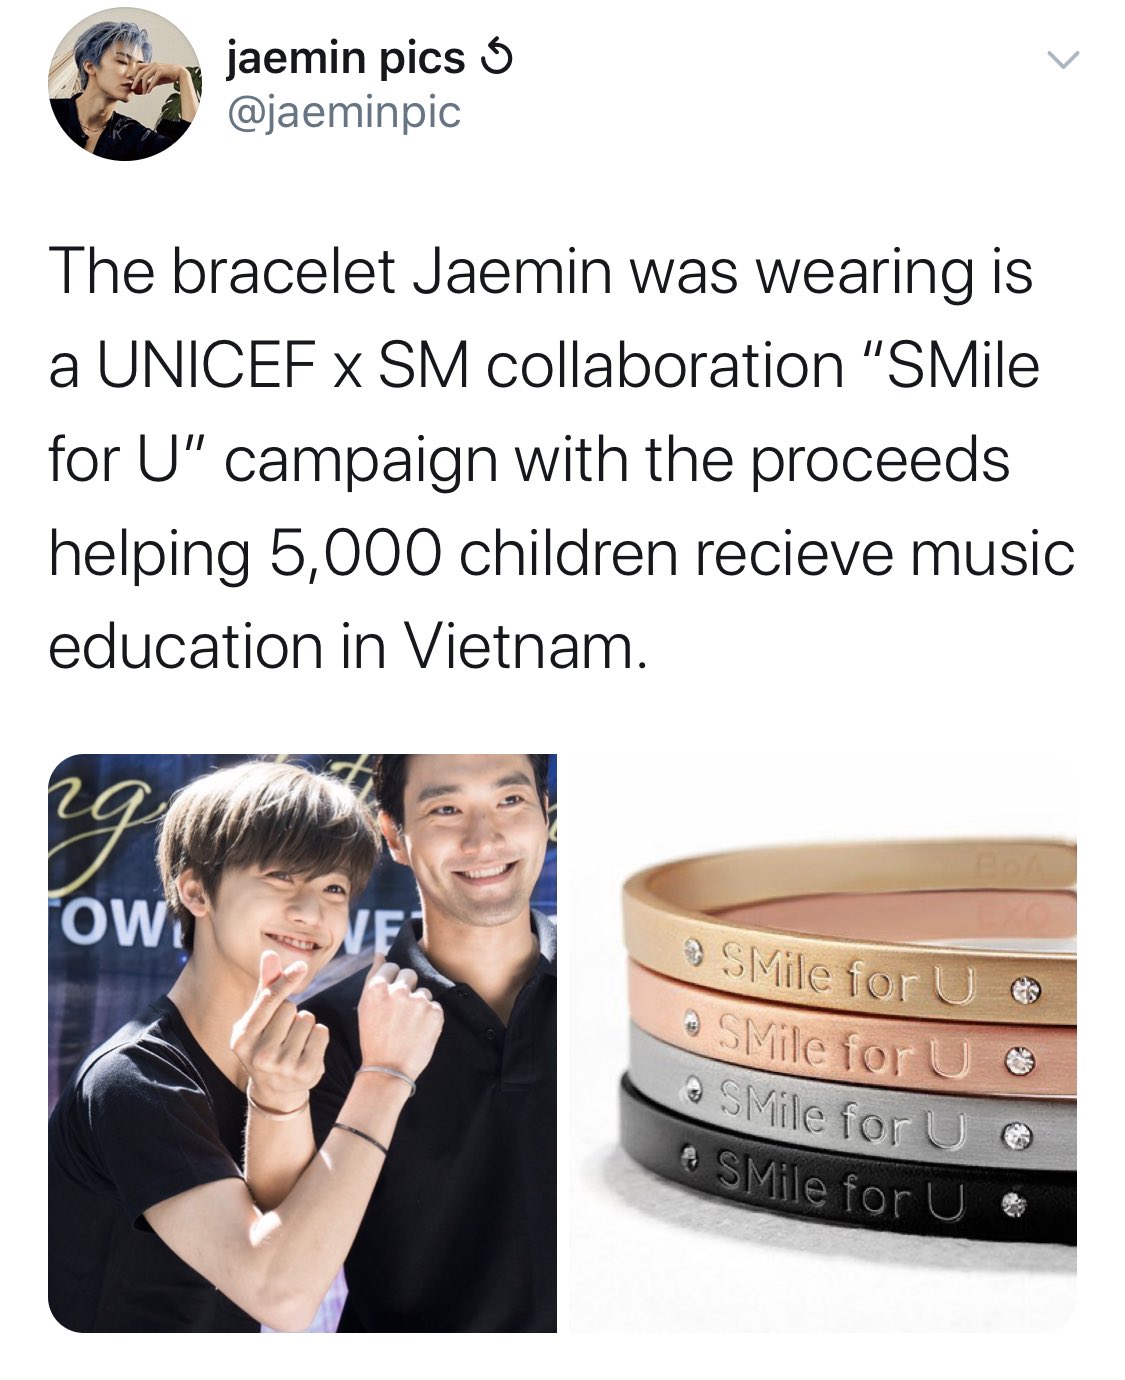 jaemin pics on X: jaemin was street casted whilst volunteering at an  animal shelter in his early teen years, as nct's jaemin he partnered with -  ralph lauren's cancer campaign - unicef